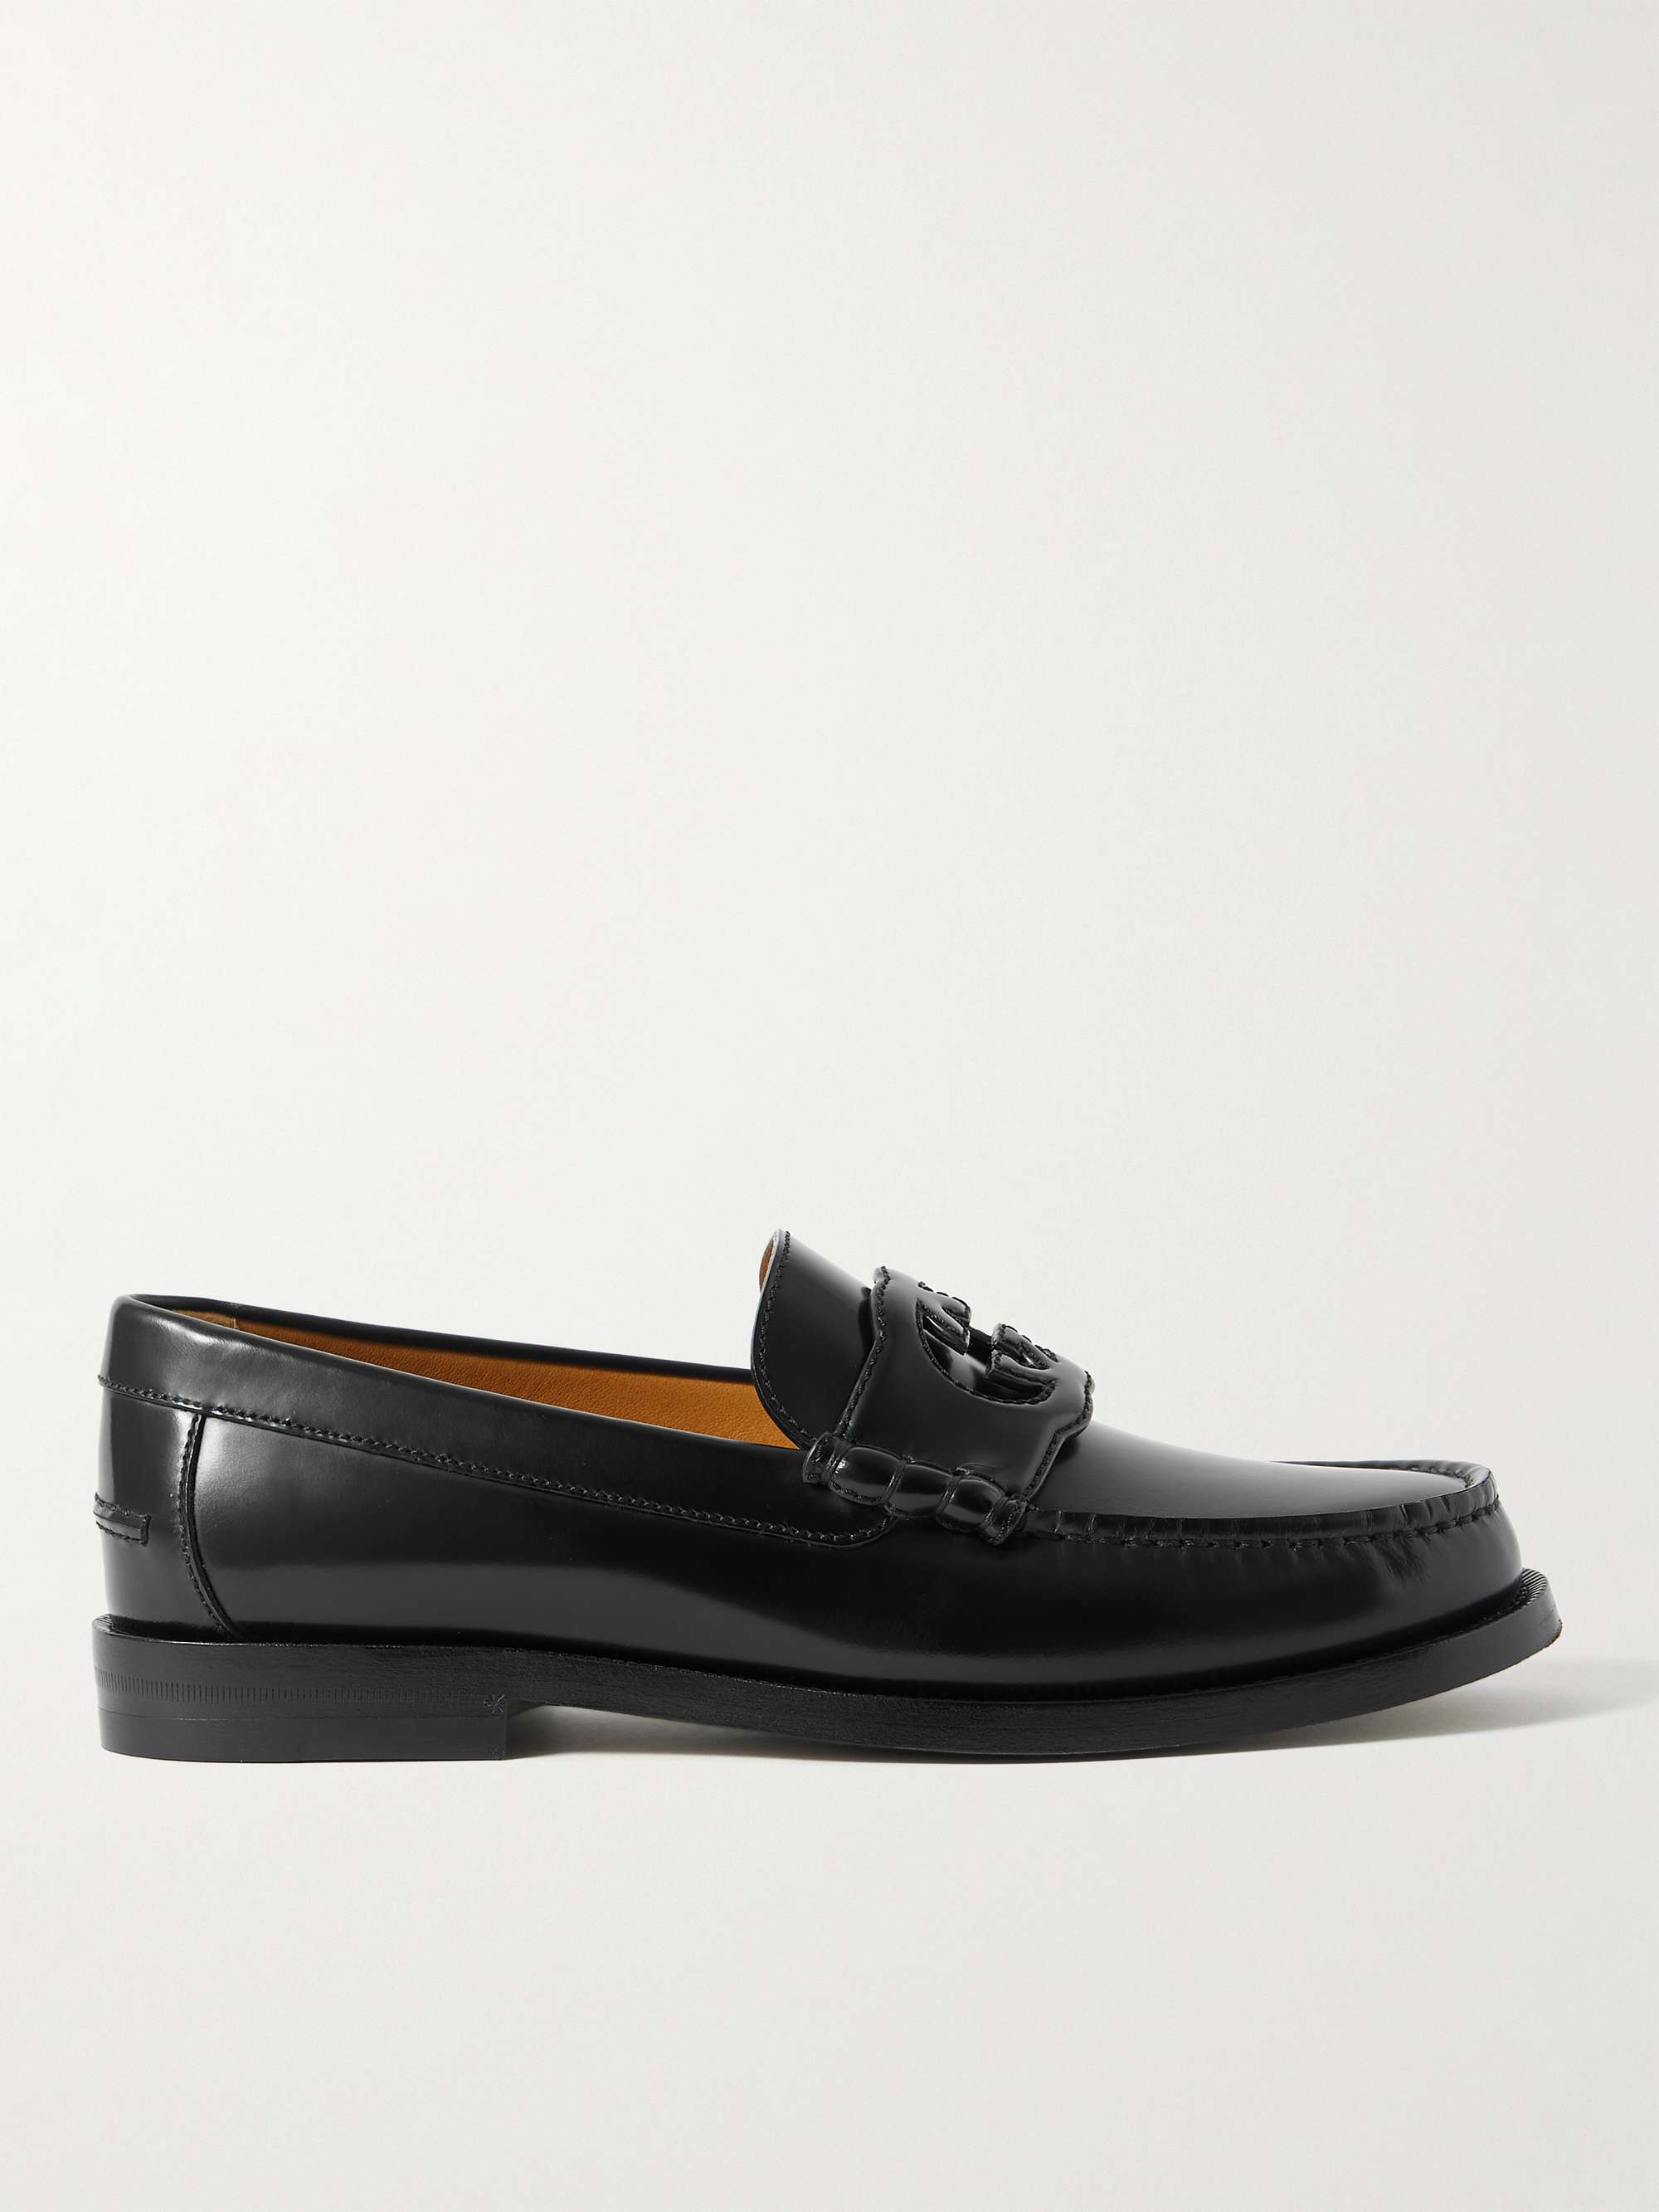 GUCCI Logo-Cutout Leather Penny Loafers